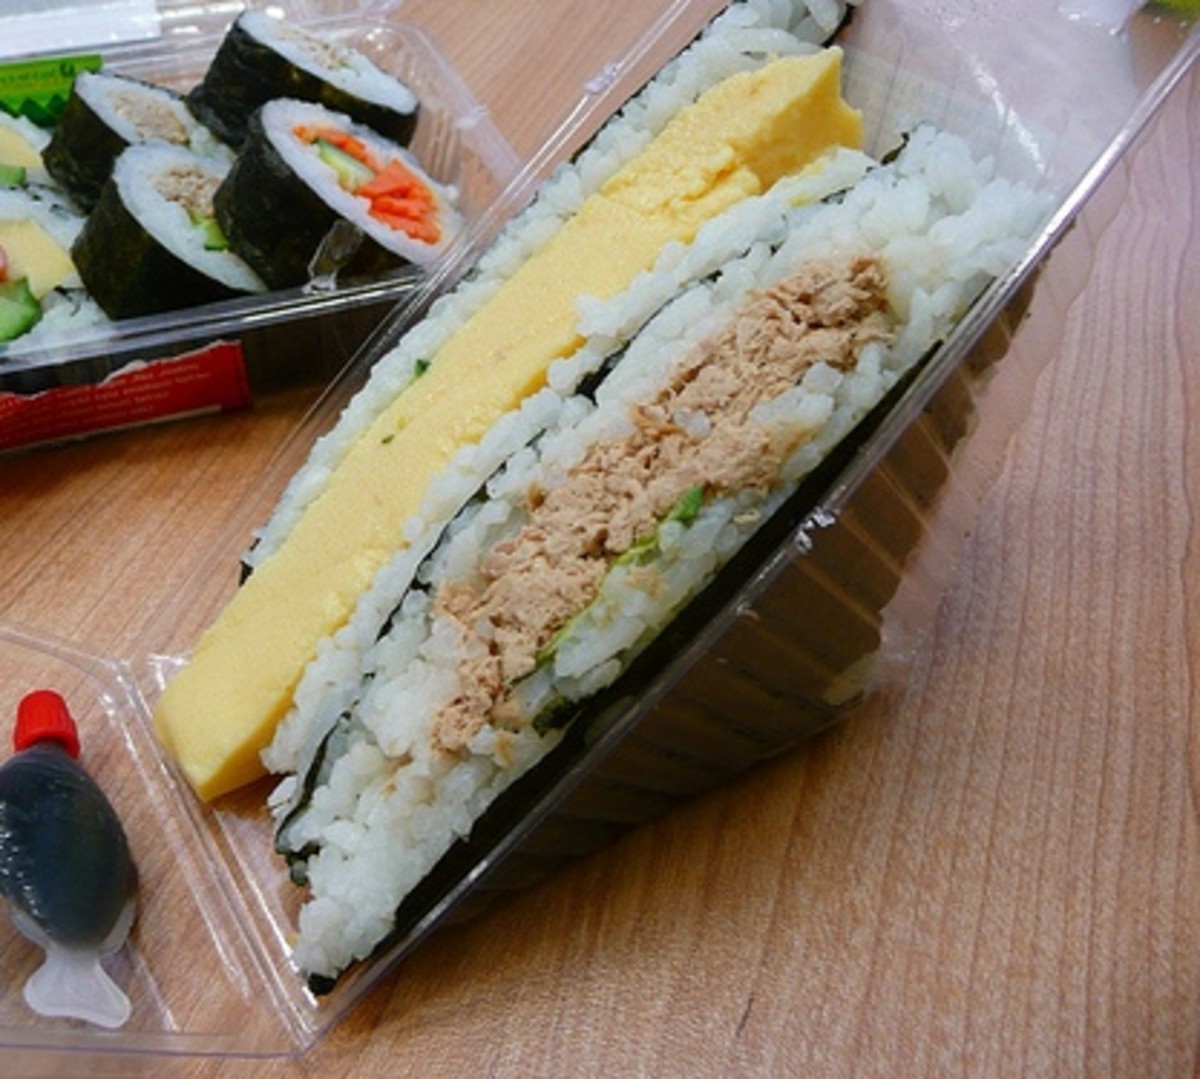 Nori Sandwiches. Pictured: Egg and Cooked Tuna.